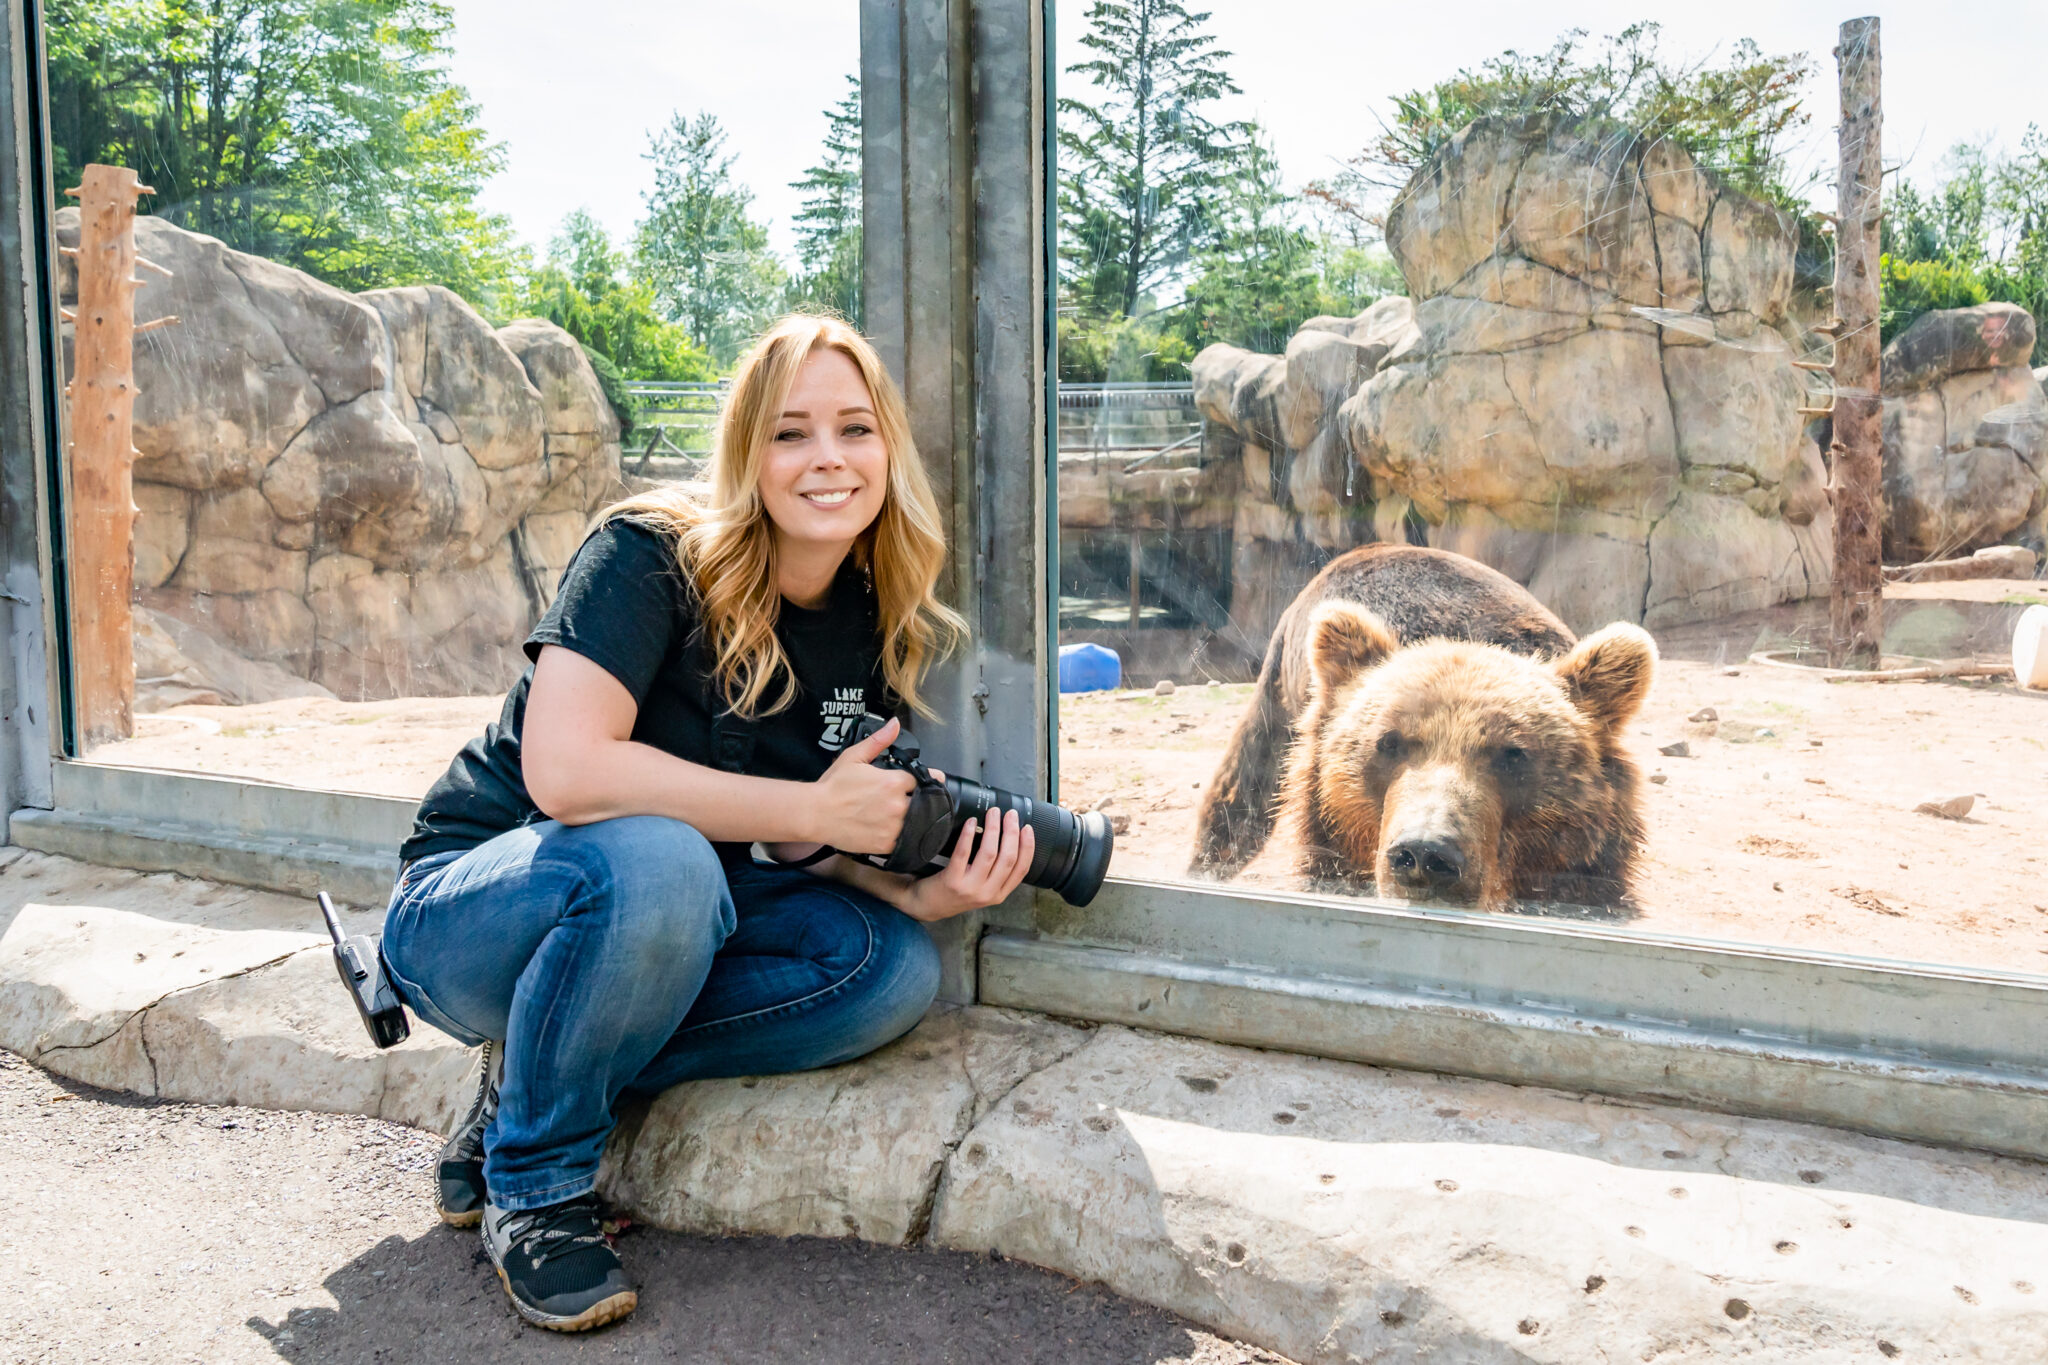 Heidi Beal poses with her camera in front of a bear